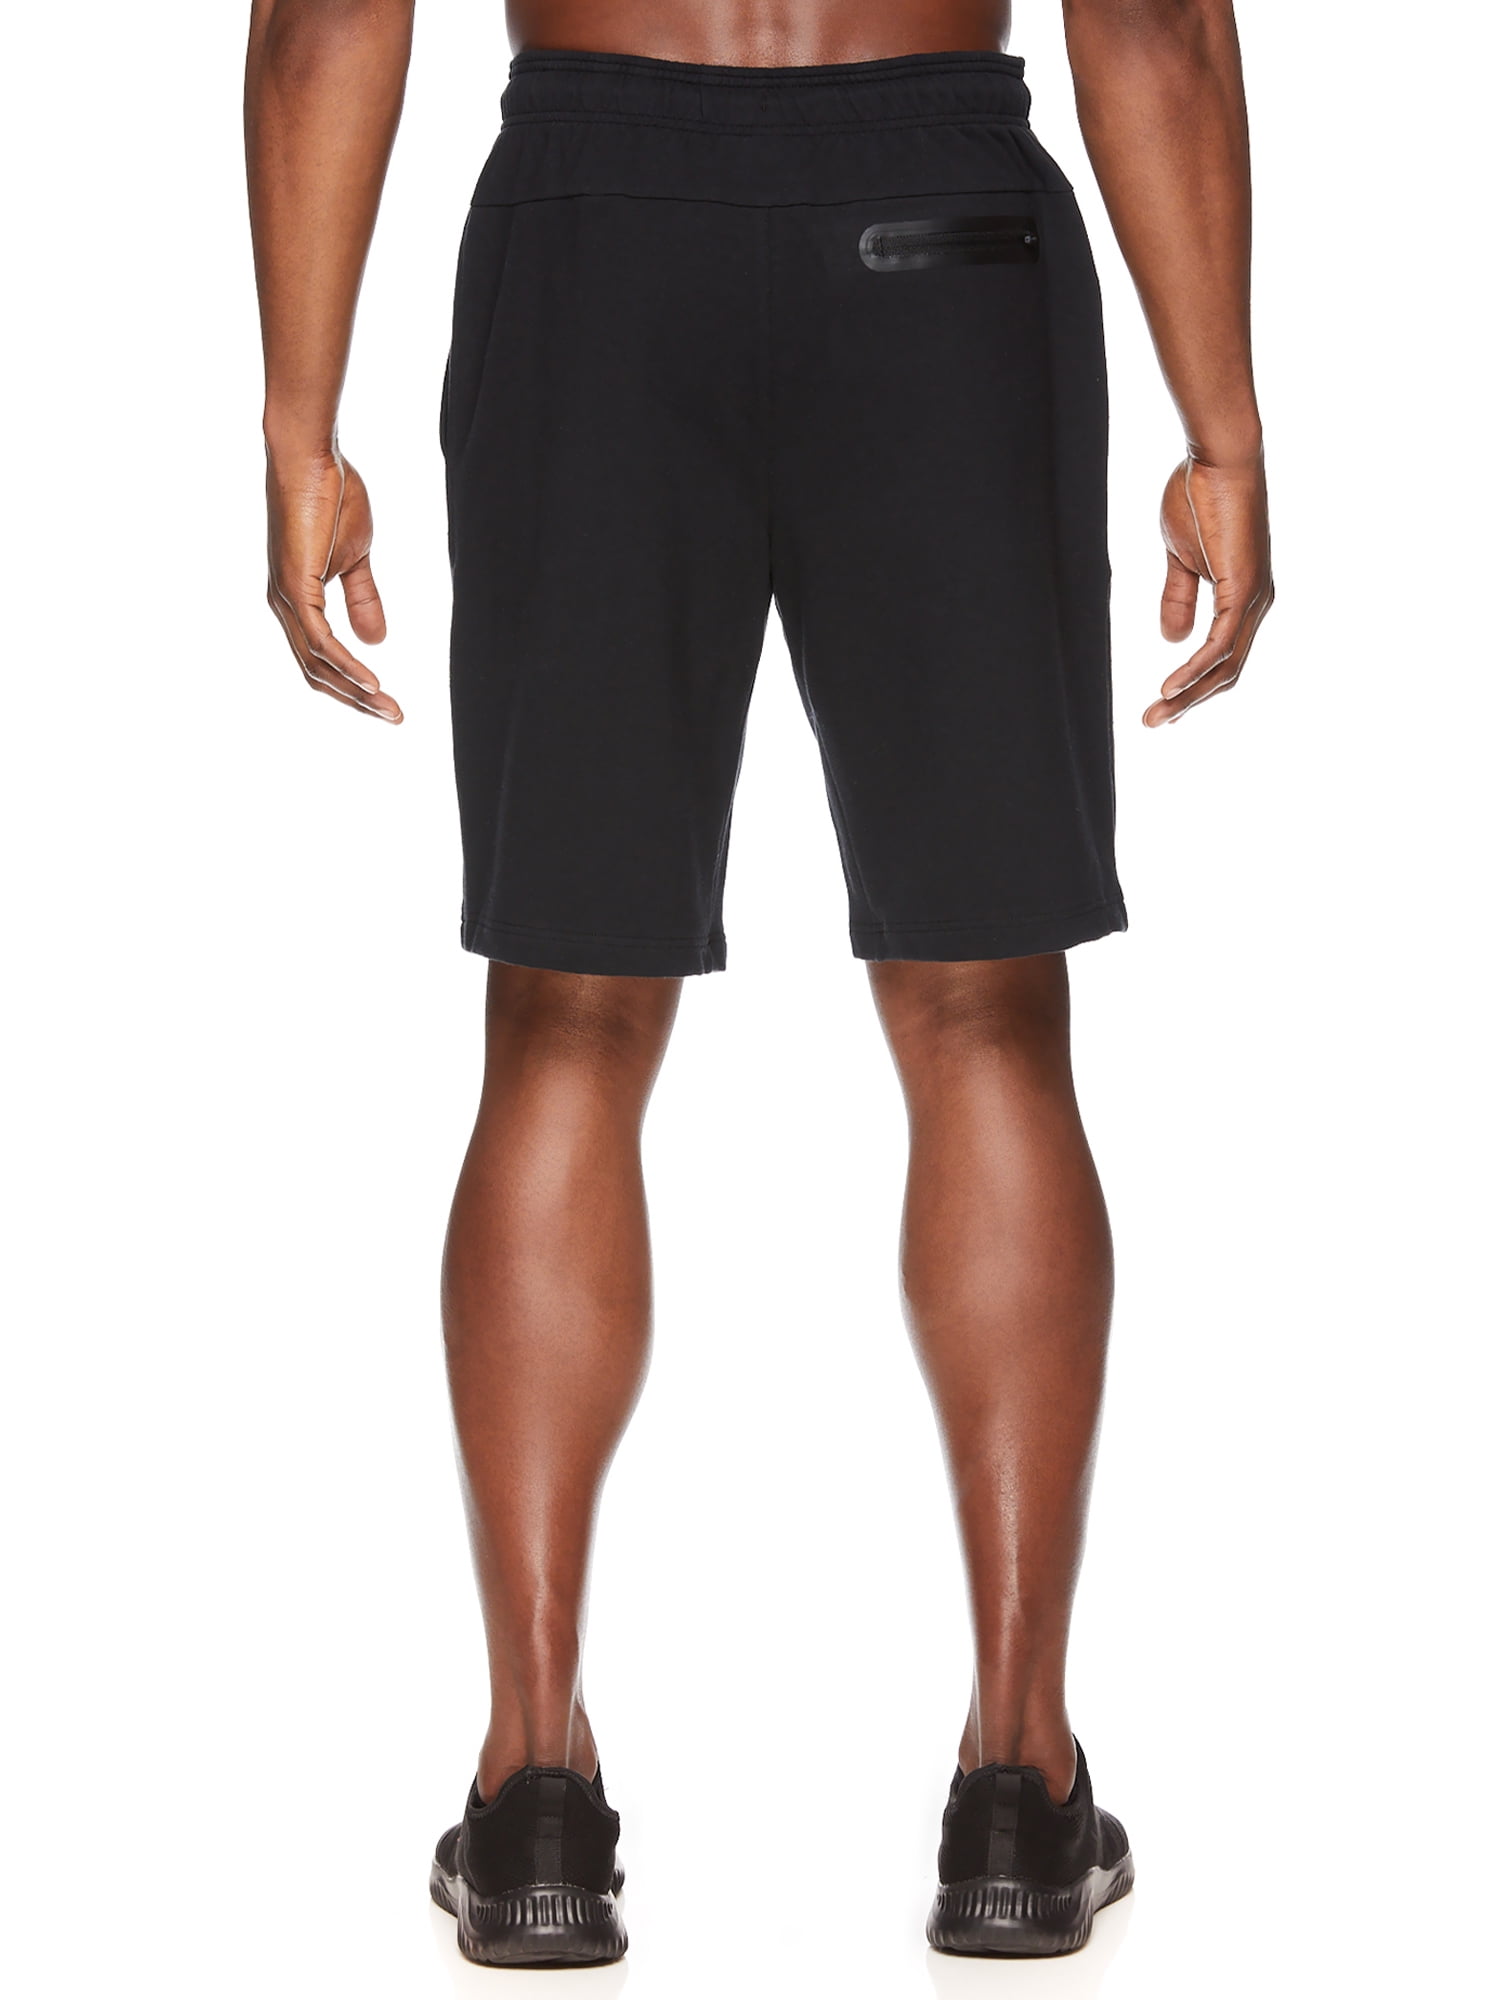 Men's and Big Men's Active Stretch Training Knit 10" Inseam, up to Size 3XL - Walmart.com